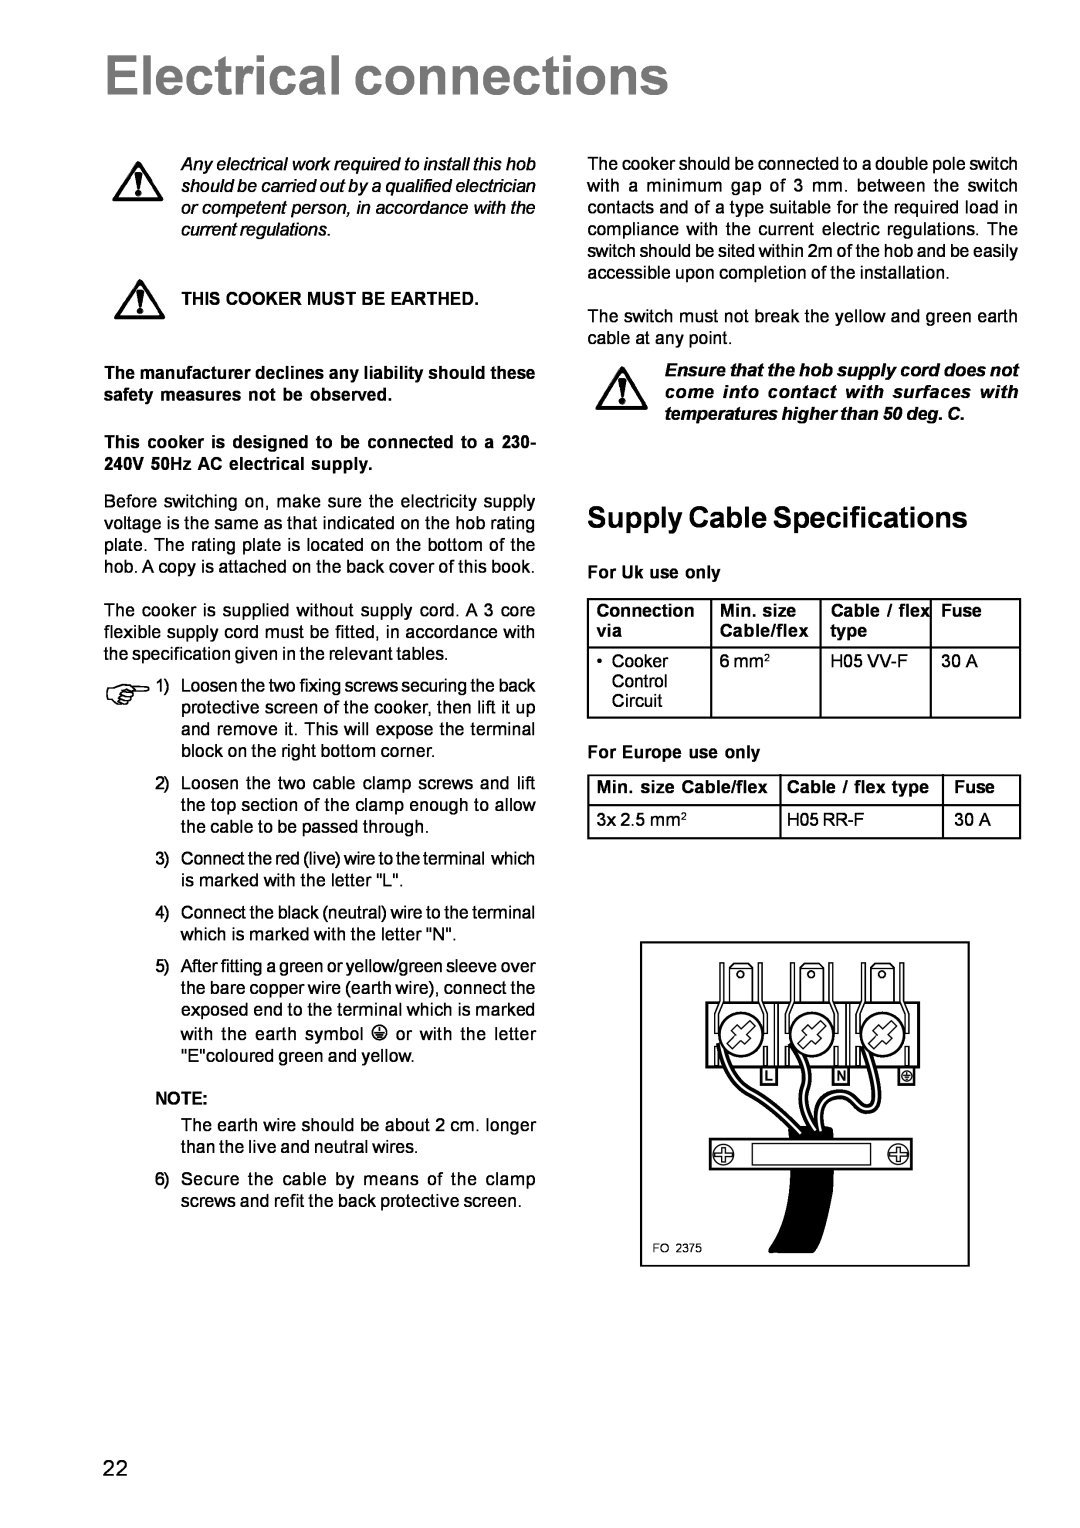 Zanussi ZCE 611 manual Electrical connections, Supply Cable Specifications 